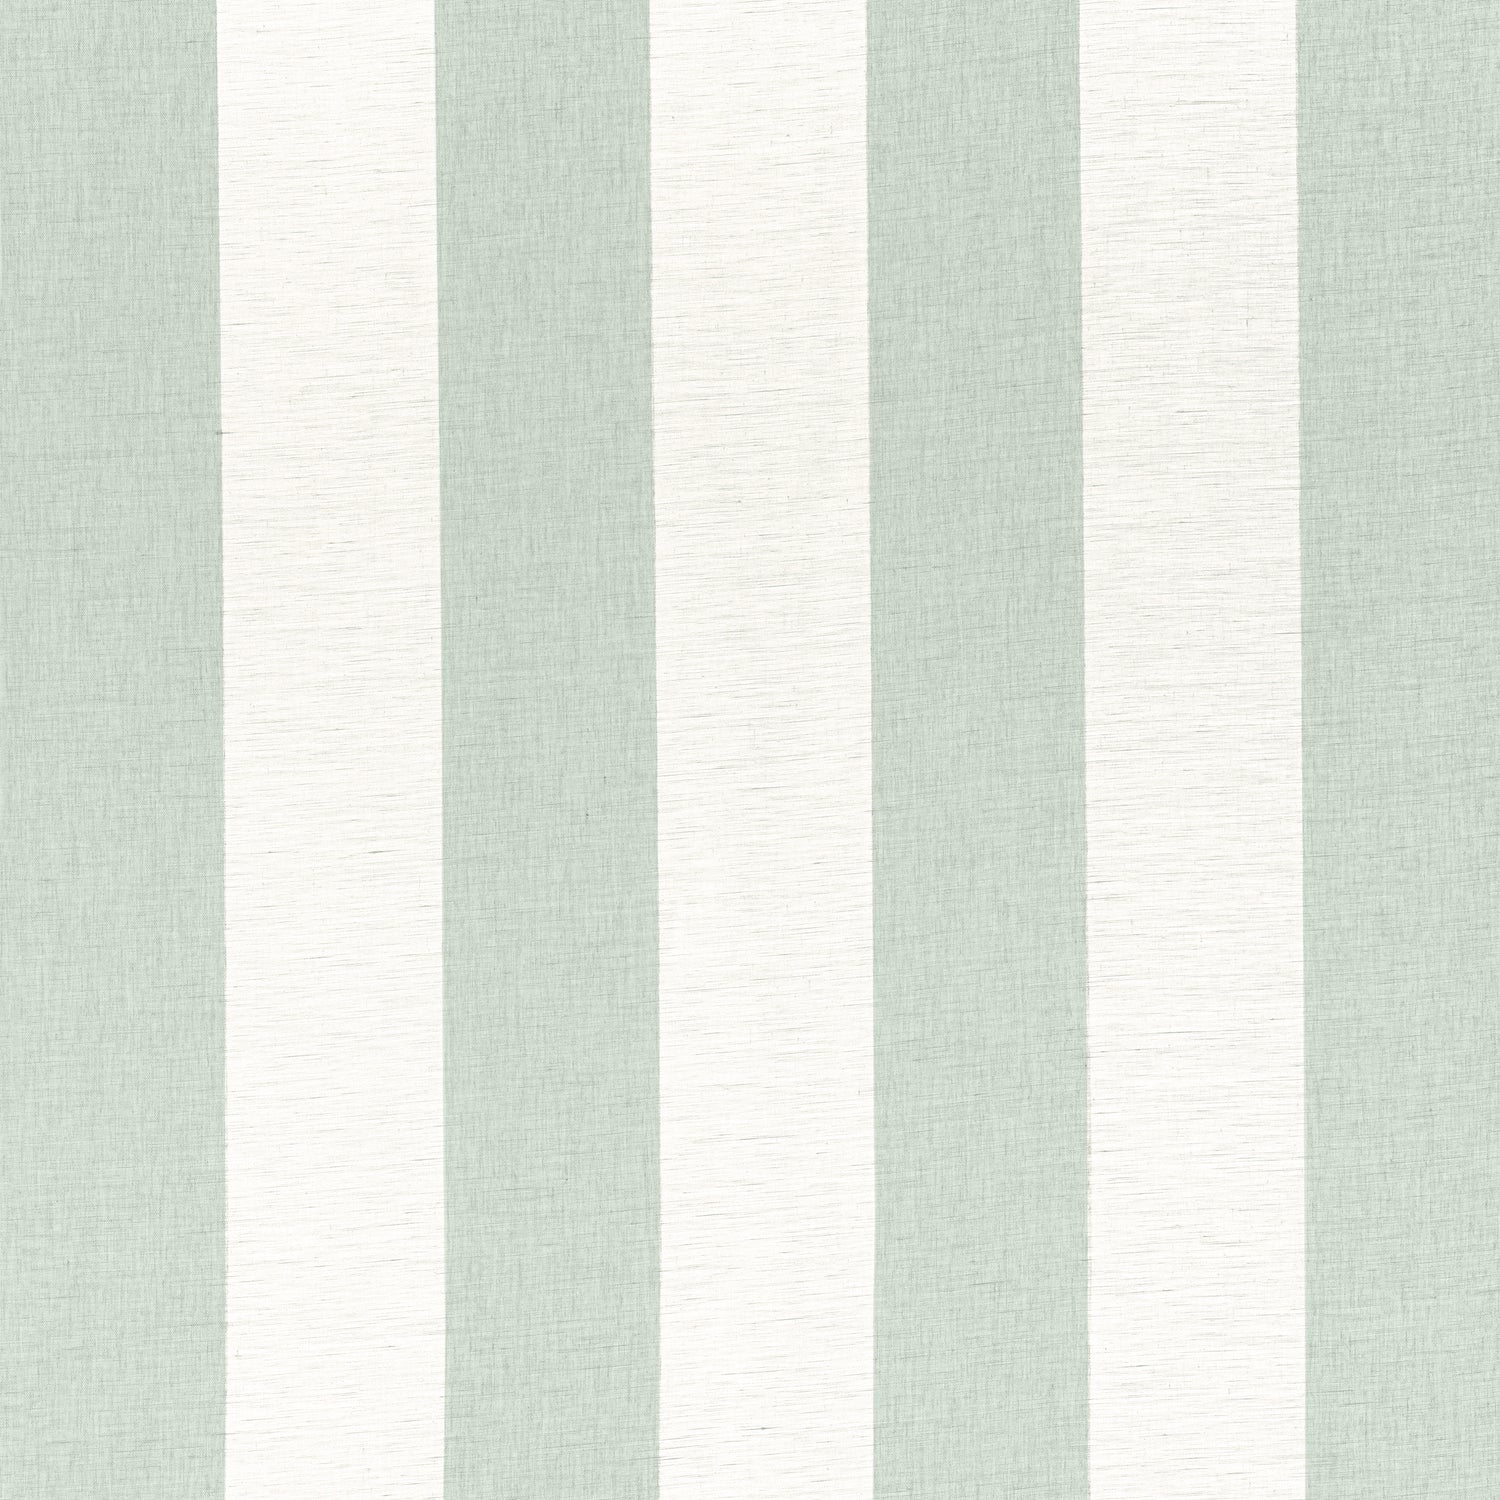 Newport Stripe fabric in aloe and flax color - pattern number FWW8212 - by Thibaut in the Aura collection